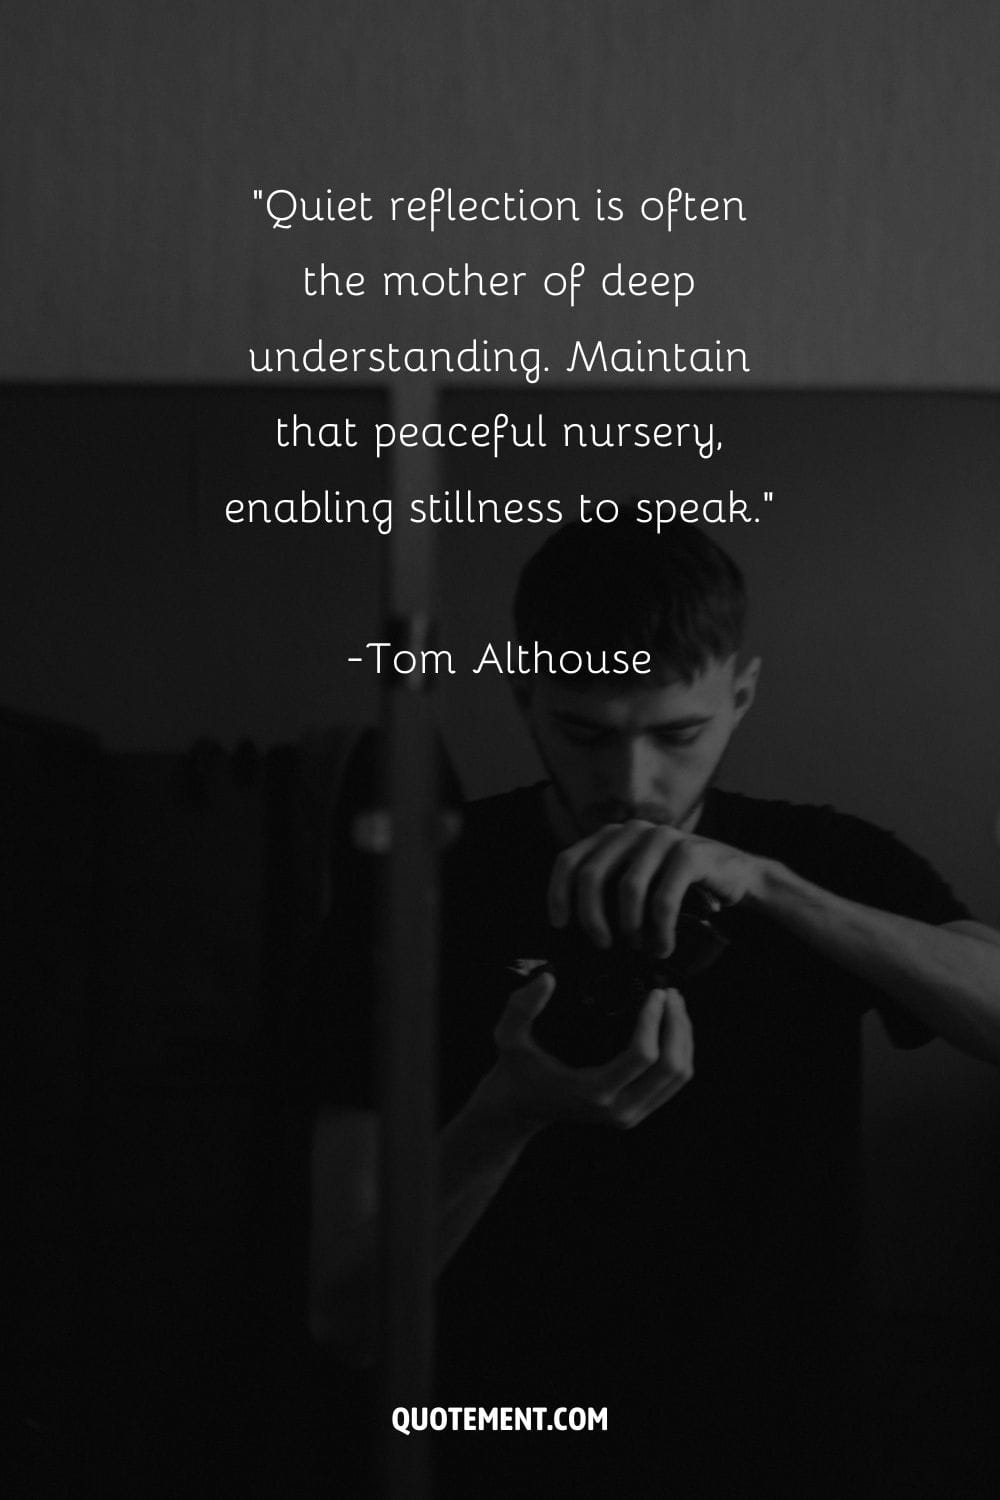 Quiet reflection is often the mother of deep understanding. Maintain that peaceful nursery, enabling stillness to speak. – Tom Althouse